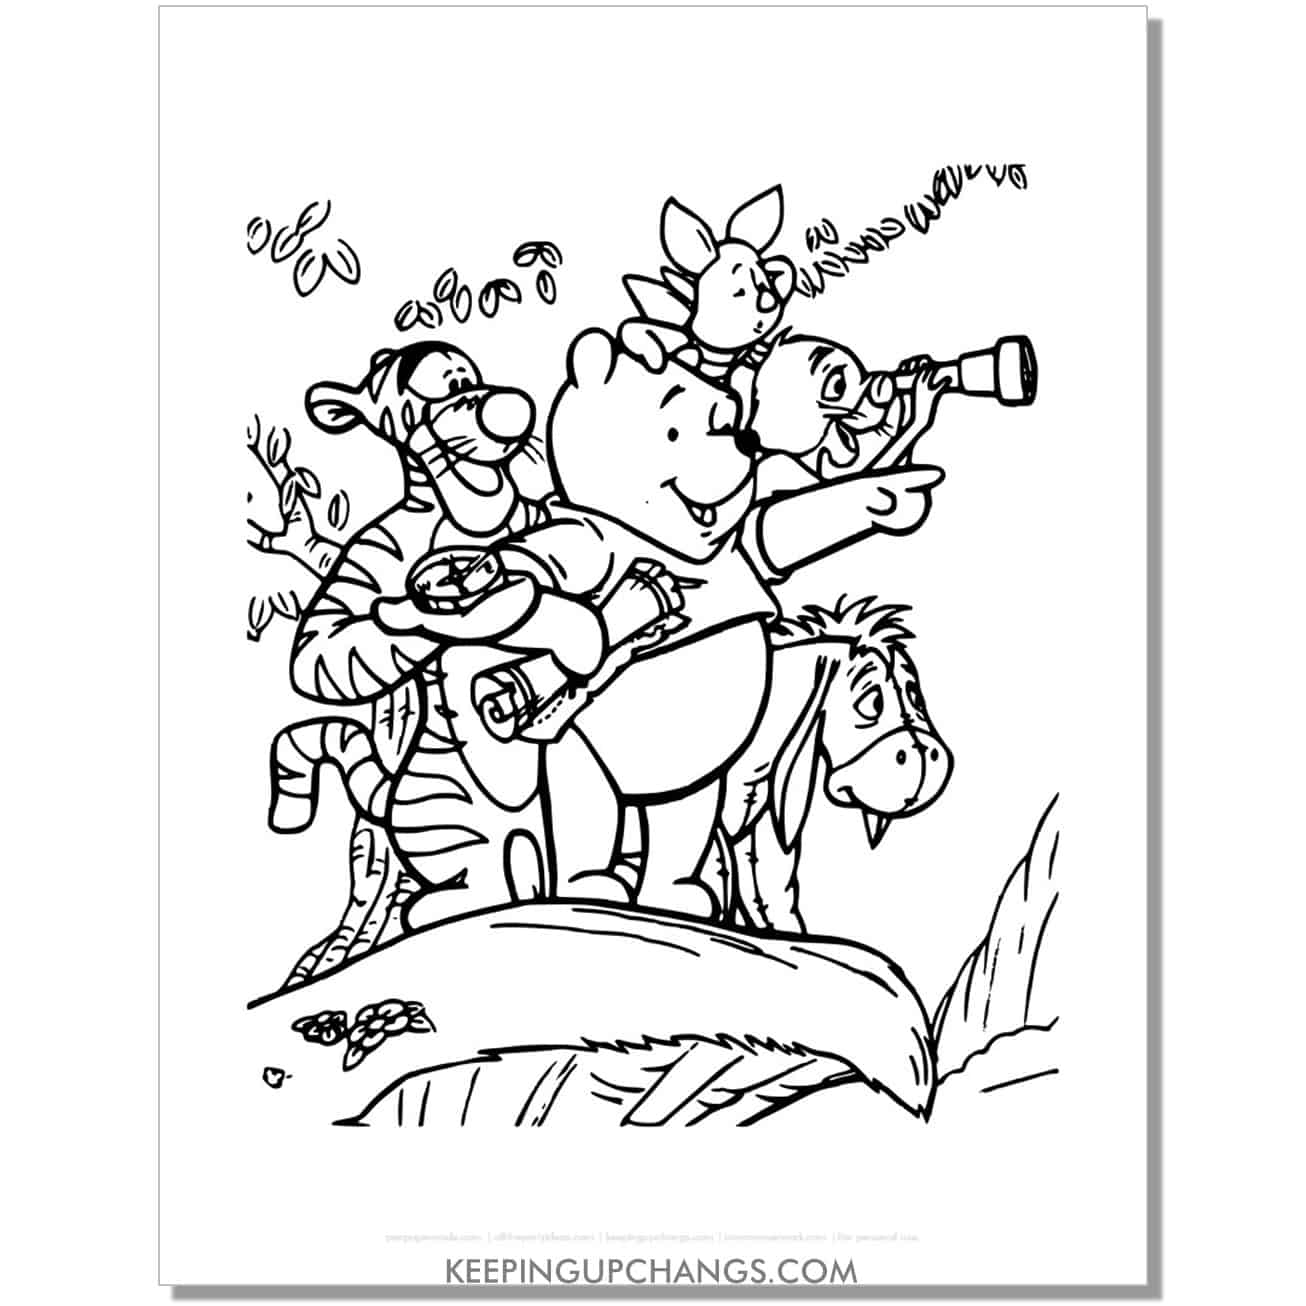 winnie the pooh and friends go on an adventure coloring page, sheet.